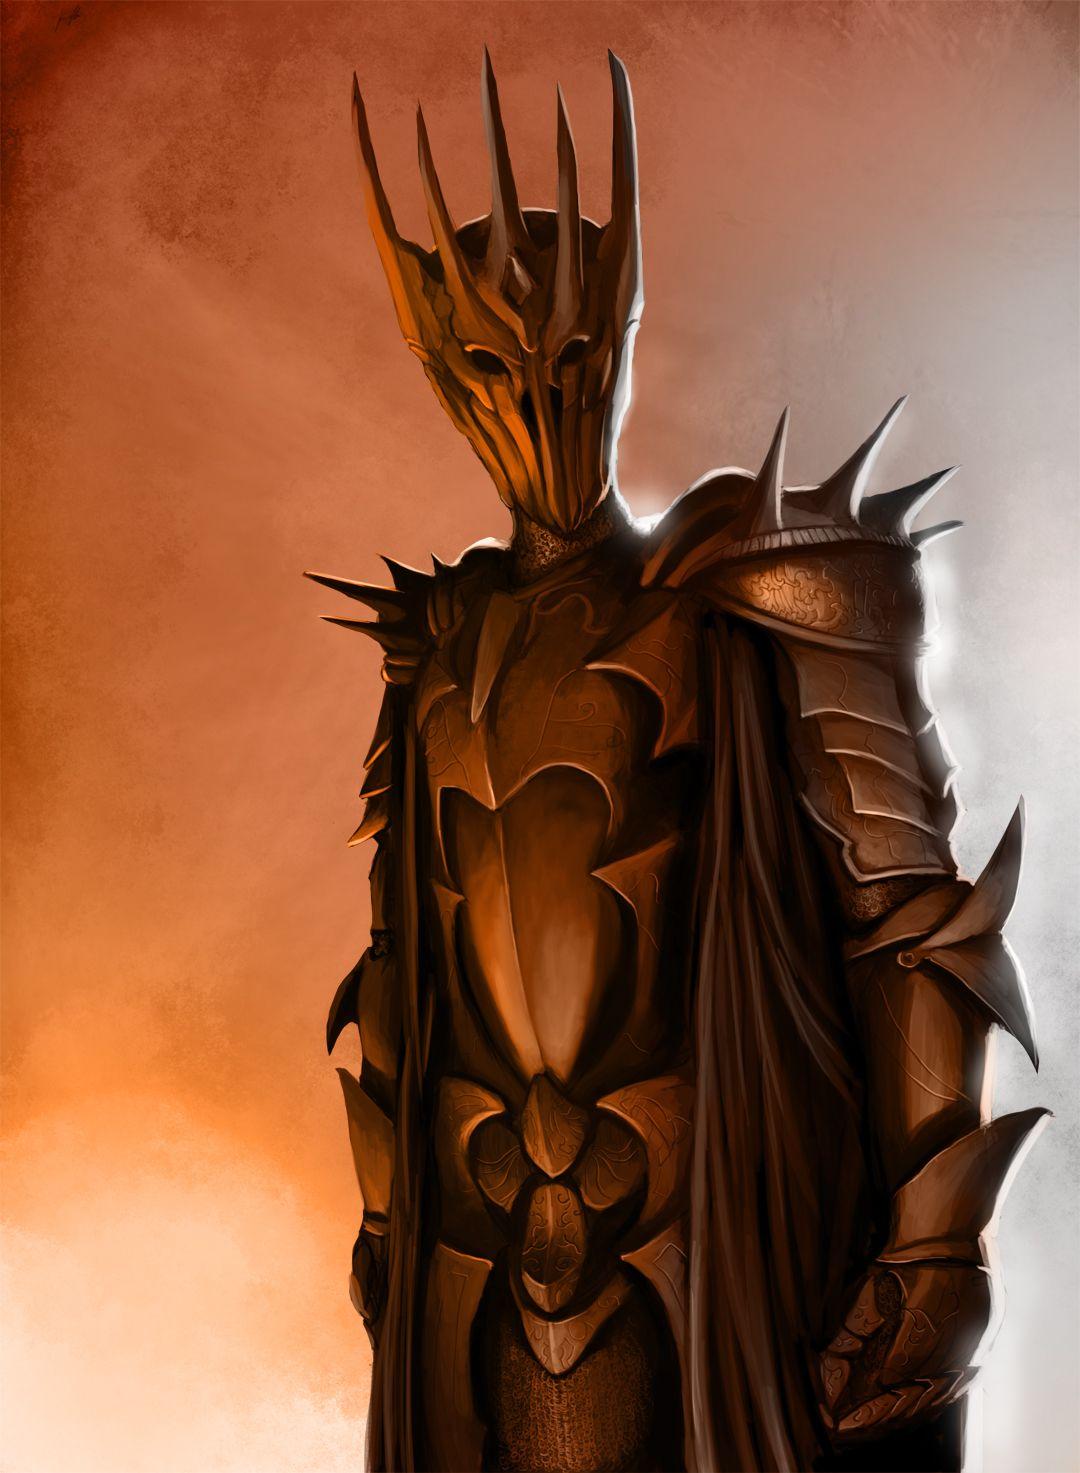 Sauron Wallpapers Top Free Sauron Backgrounds WallpaperAccess